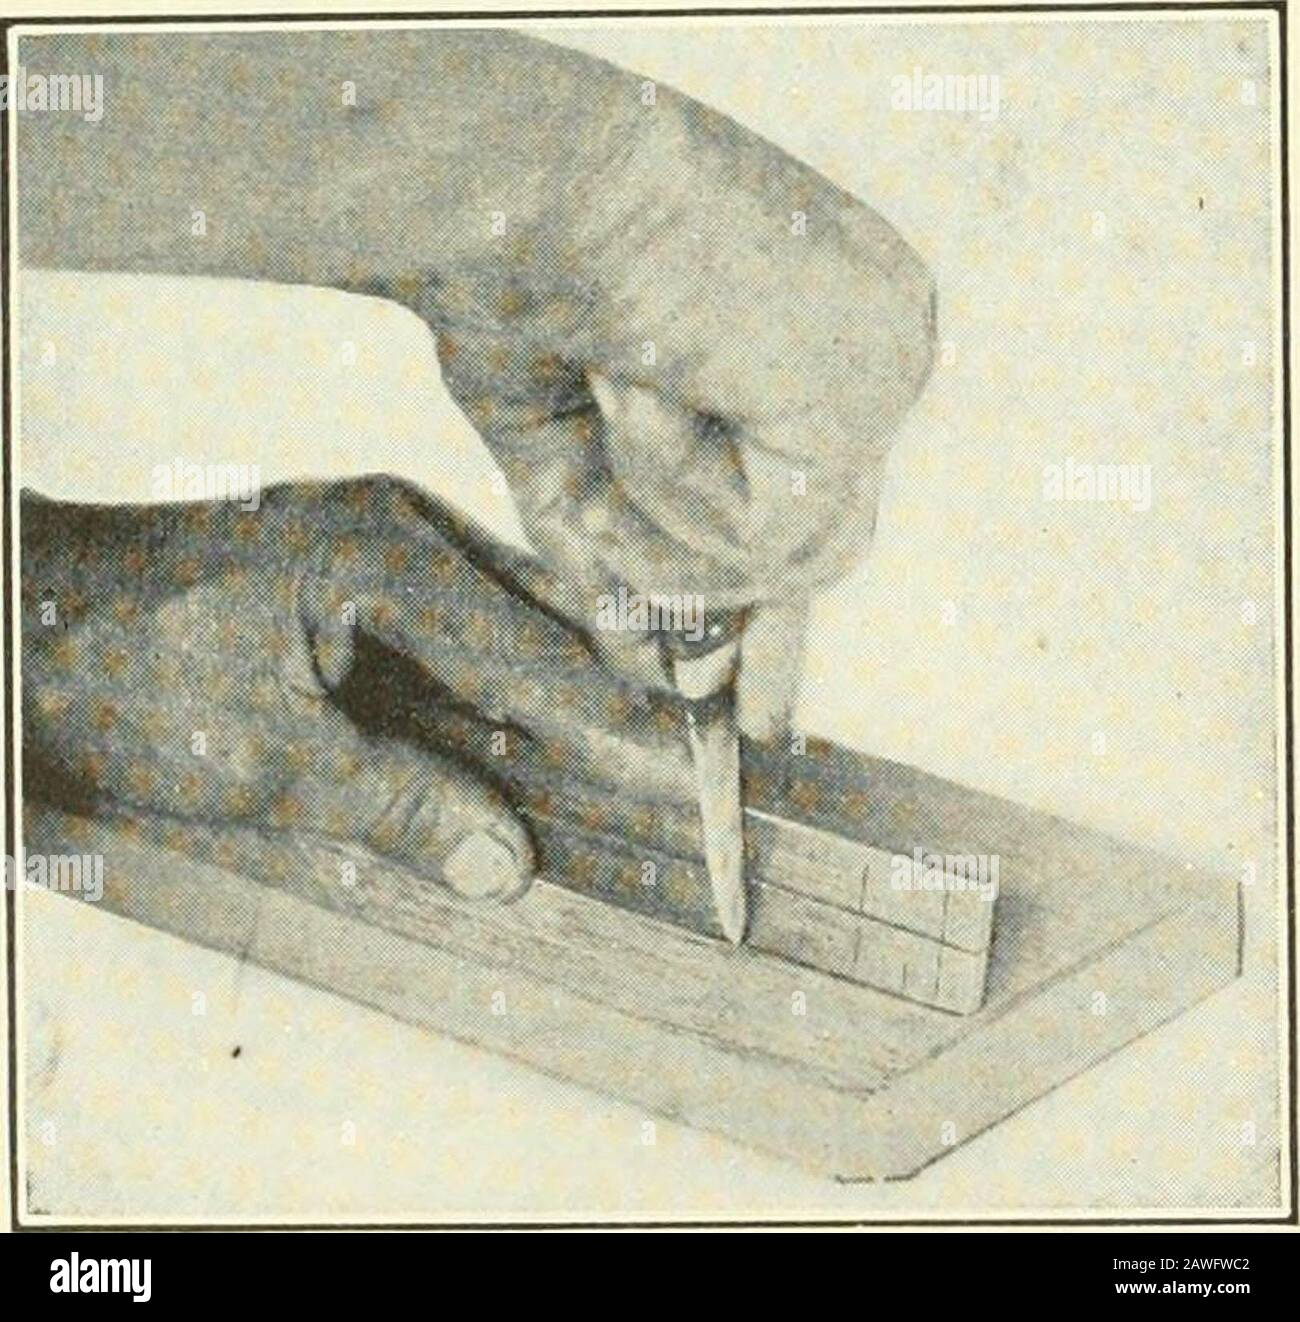 A shorter course in woodworking; a practical manual for home and school . ed most nearest to the worker. Have tools that gotogether, as bit-brace and bits, kept near together. Have all thecommon tools within reach, instead of put away in chests and drawers. Oily rags should either be burned at once, or, if a few are kept,should be kept in a stone jar or covered tin box. They are dangerous.If there is any dampness in the shop, the steel and iron parts of thetools should be rubbed, after using, with a little fat,—tallow, lard,wax, vaseline, oily cloth, or some anti-rust preparation. PART I COMMO Stock Photo